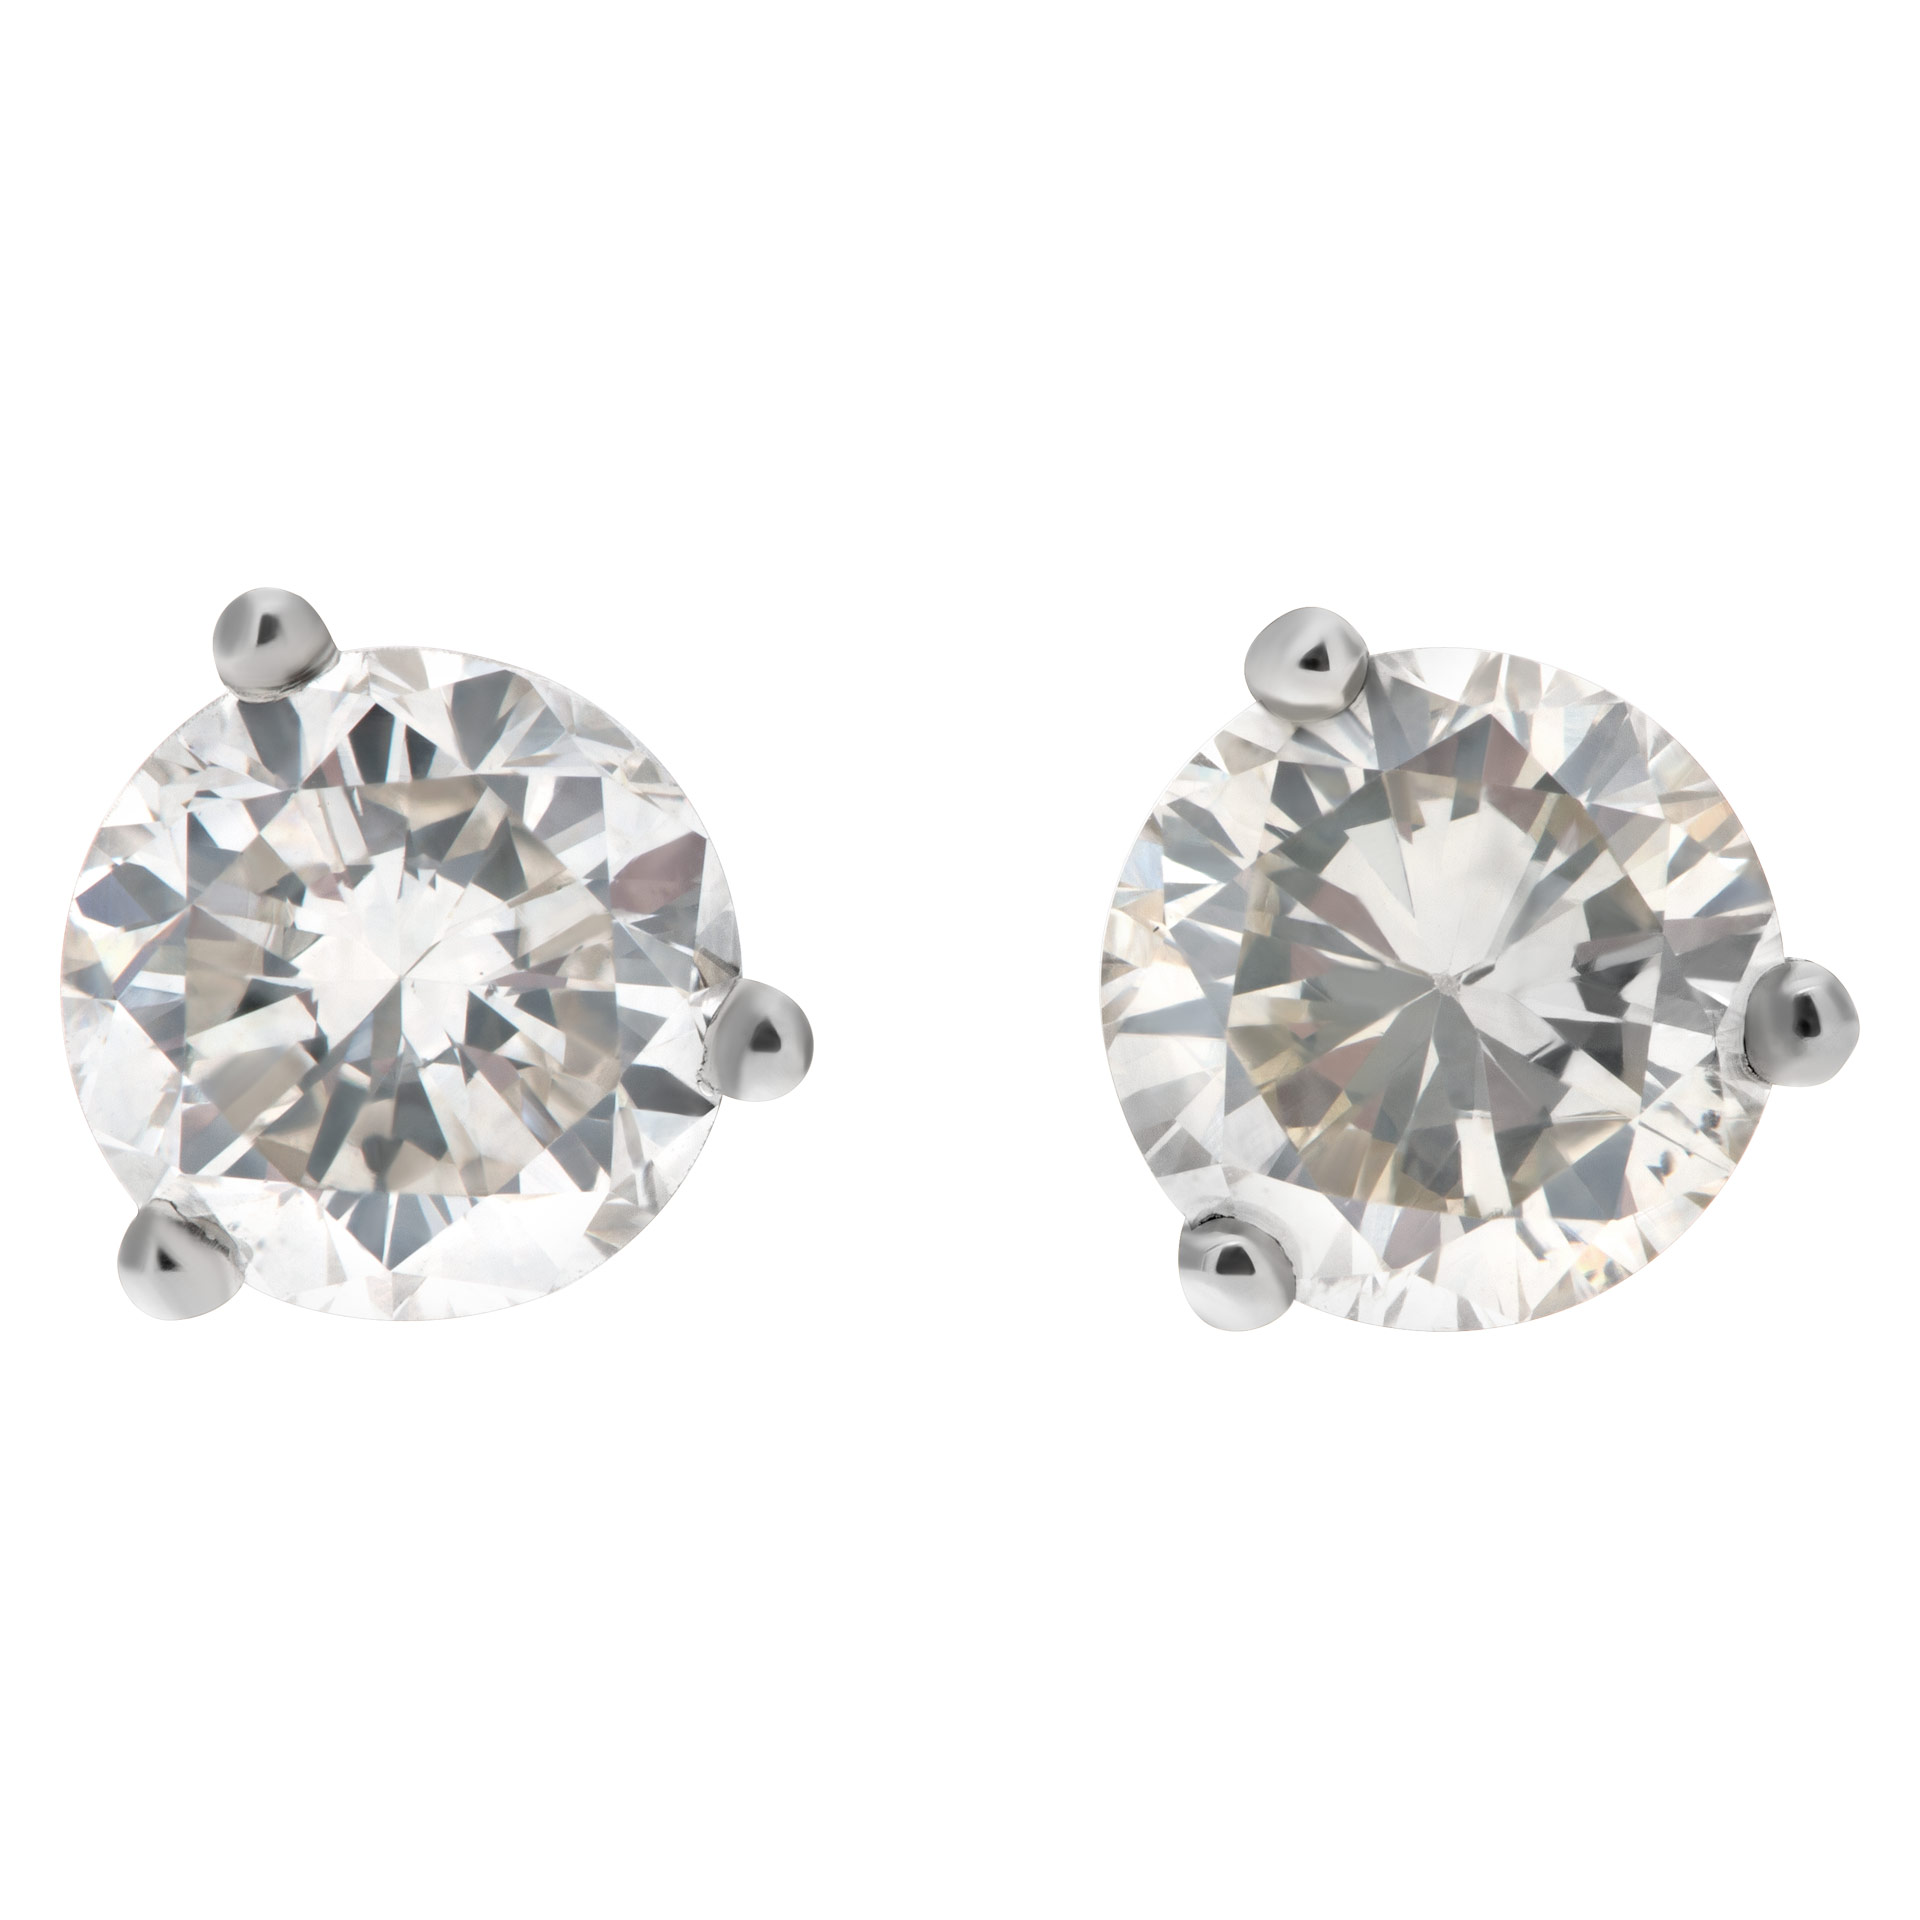 GIA certified diamond studs total 1.07 carats (S to T Range Light Brown Color, SI2 Clarity)